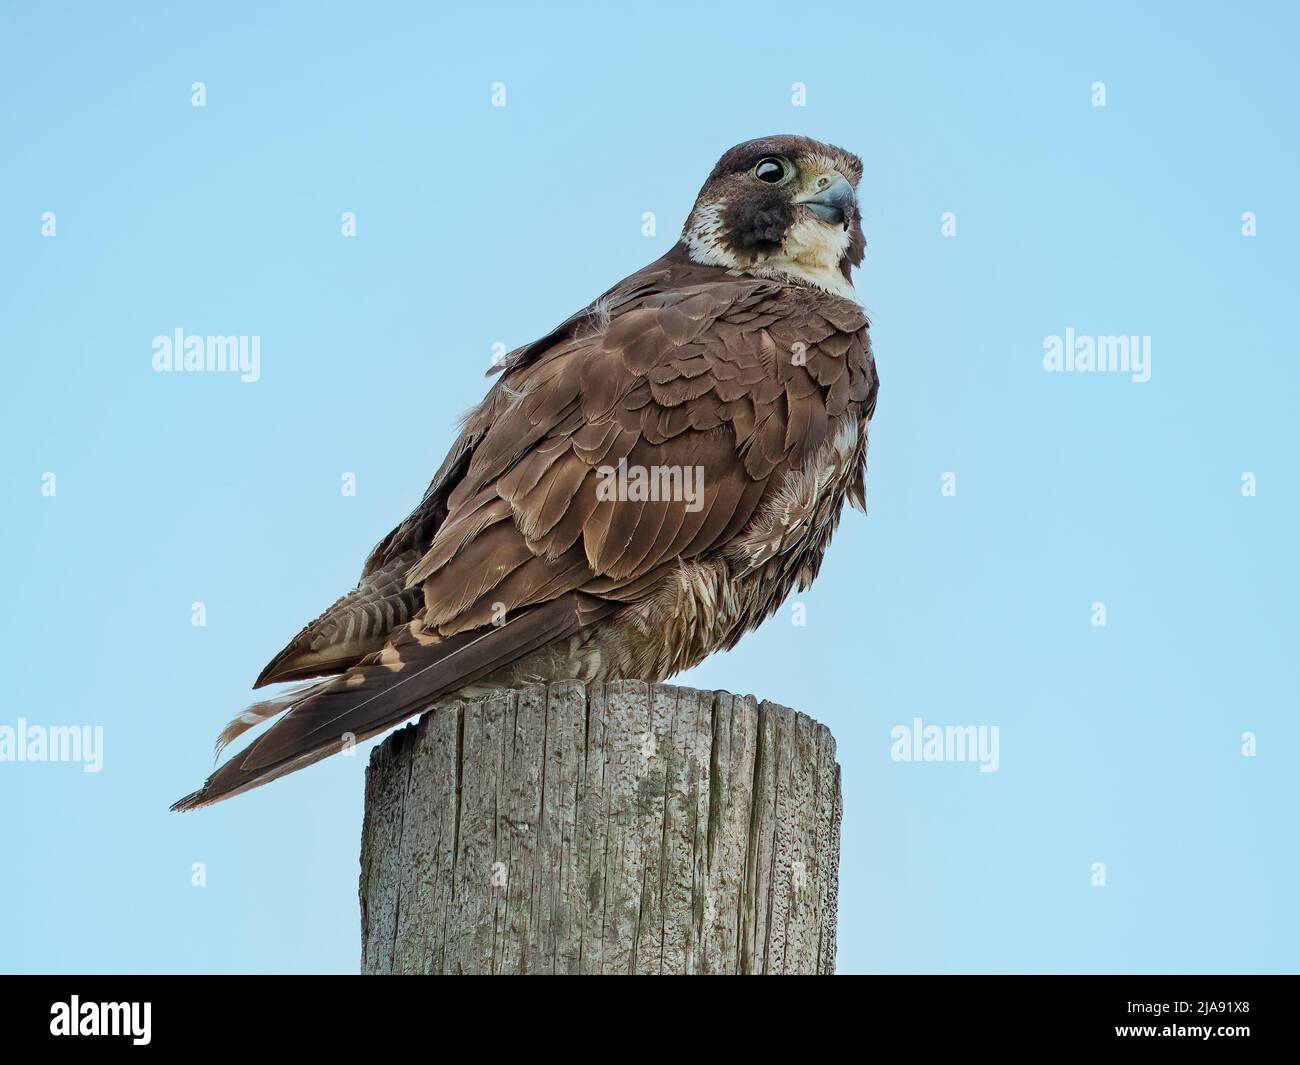 A Juvenile Peregrine Falcon Sitting on a Wood Piling Stock Photo